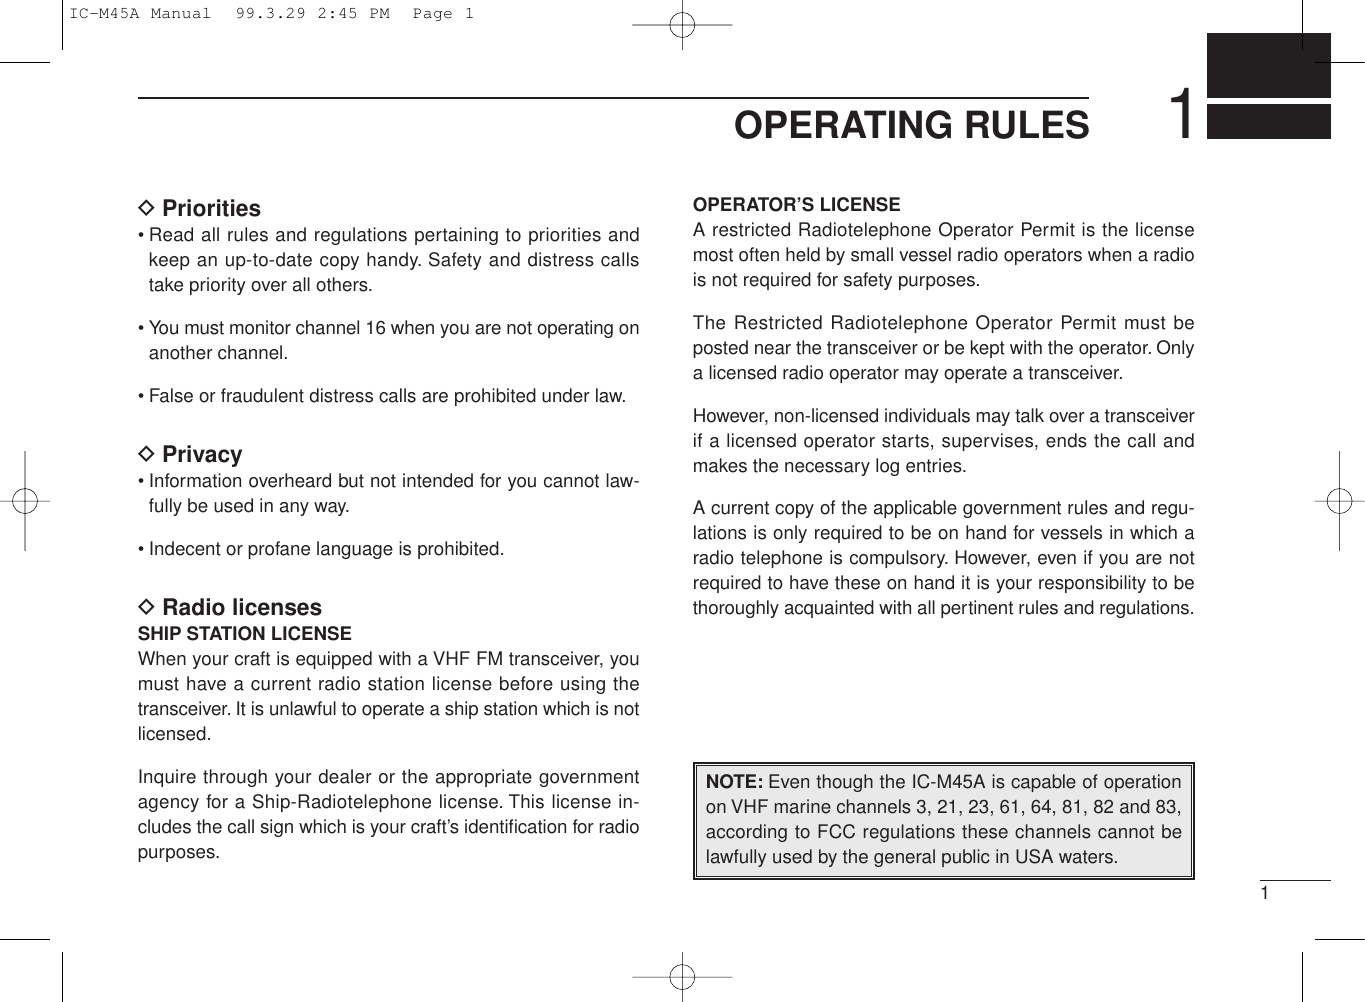 11OPERATING RULESDPriorities• Read all rules and regulations pertaining to priorities andkeep an up-to-date copy handy. Safety and distress callstake priority over all others.• You must monitor channel 16 when you are not operating onanother channel.• False or fraudulent distress calls are prohibited under law.DPrivacy• Information overheard but not intended for you cannot law-fully be used in any way.• Indecent or profane language is prohibited.DRadio licensesSHIP STATION LICENSEWhen your craft is equipped with a VHF FM transceiver, youmust have a current radio station license before using thetransceiver. It is unlawful to operate a ship station which is notlicensed.Inquire through your dealer or the appropriate governmentagency for a Ship-Radiotelephone license. This license in-cludes the call sign which is your craft’s identiﬁcation for radiopurposes.OPERATOR’S LICENSEA restricted Radiotelephone Operator Permit is the licensemost often held by small vessel radio operators when a radiois not required for safety purposes.The Restricted Radiotelephone Operator Permit must beposted near the transceiver or be kept with the operator. Onlya licensed radio operator may operate a transceiver.However, non-licensed individuals may talk over a transceiverif a licensed operator starts, supervises, ends the call andmakes the necessary log entries.A current copy of the applicable government rules and regu-lations is only required to be on hand for vessels in which aradio telephone is compulsory. However, even if you are notrequired to have these on hand it is your responsibility to bethoroughly acquainted with all pertinent rules and regulations.NOTE: Even though the IC-M45A is capable of operationon VHF marine channels 3, 21, 23, 61, 64, 81, 82 and 83,according to FCC regulations these channels cannot belawfully used by the general public in USA waters.IC-M45A Manual  99.3.29 2:45 PM  Page 1